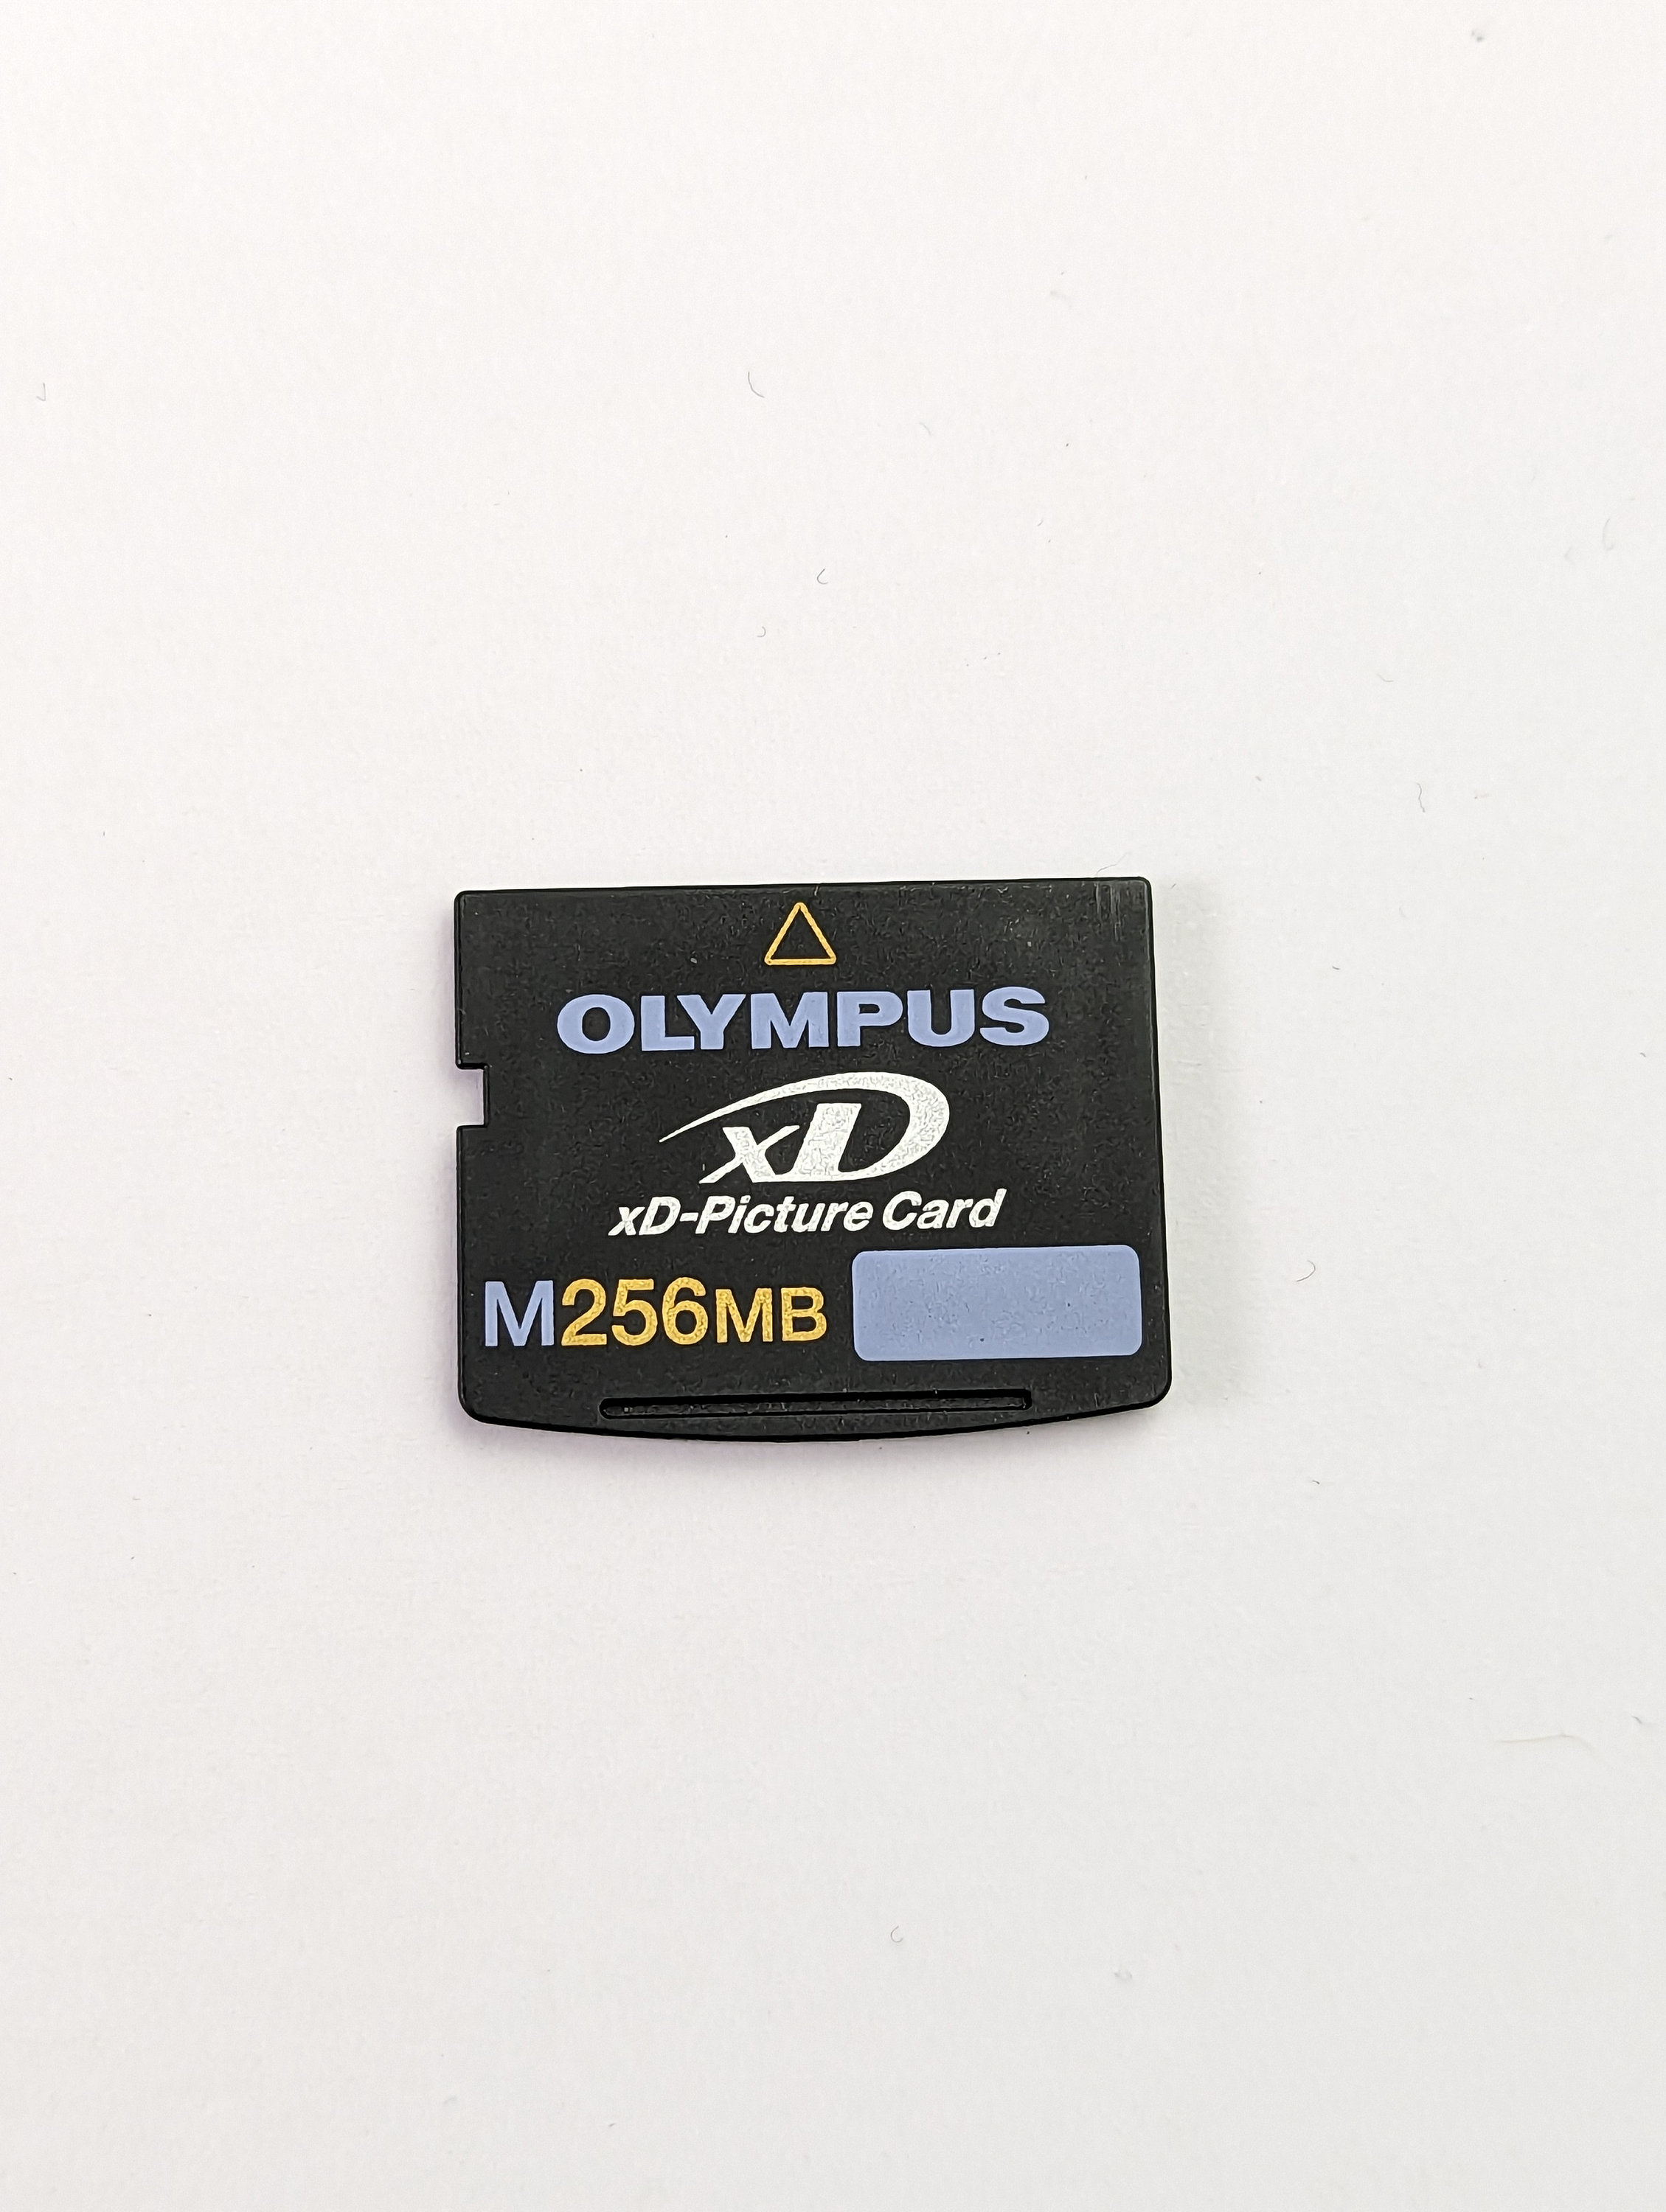 Vintage Olympus 256 Mb XD Picture Card MXD 256M3 Type M Made ...